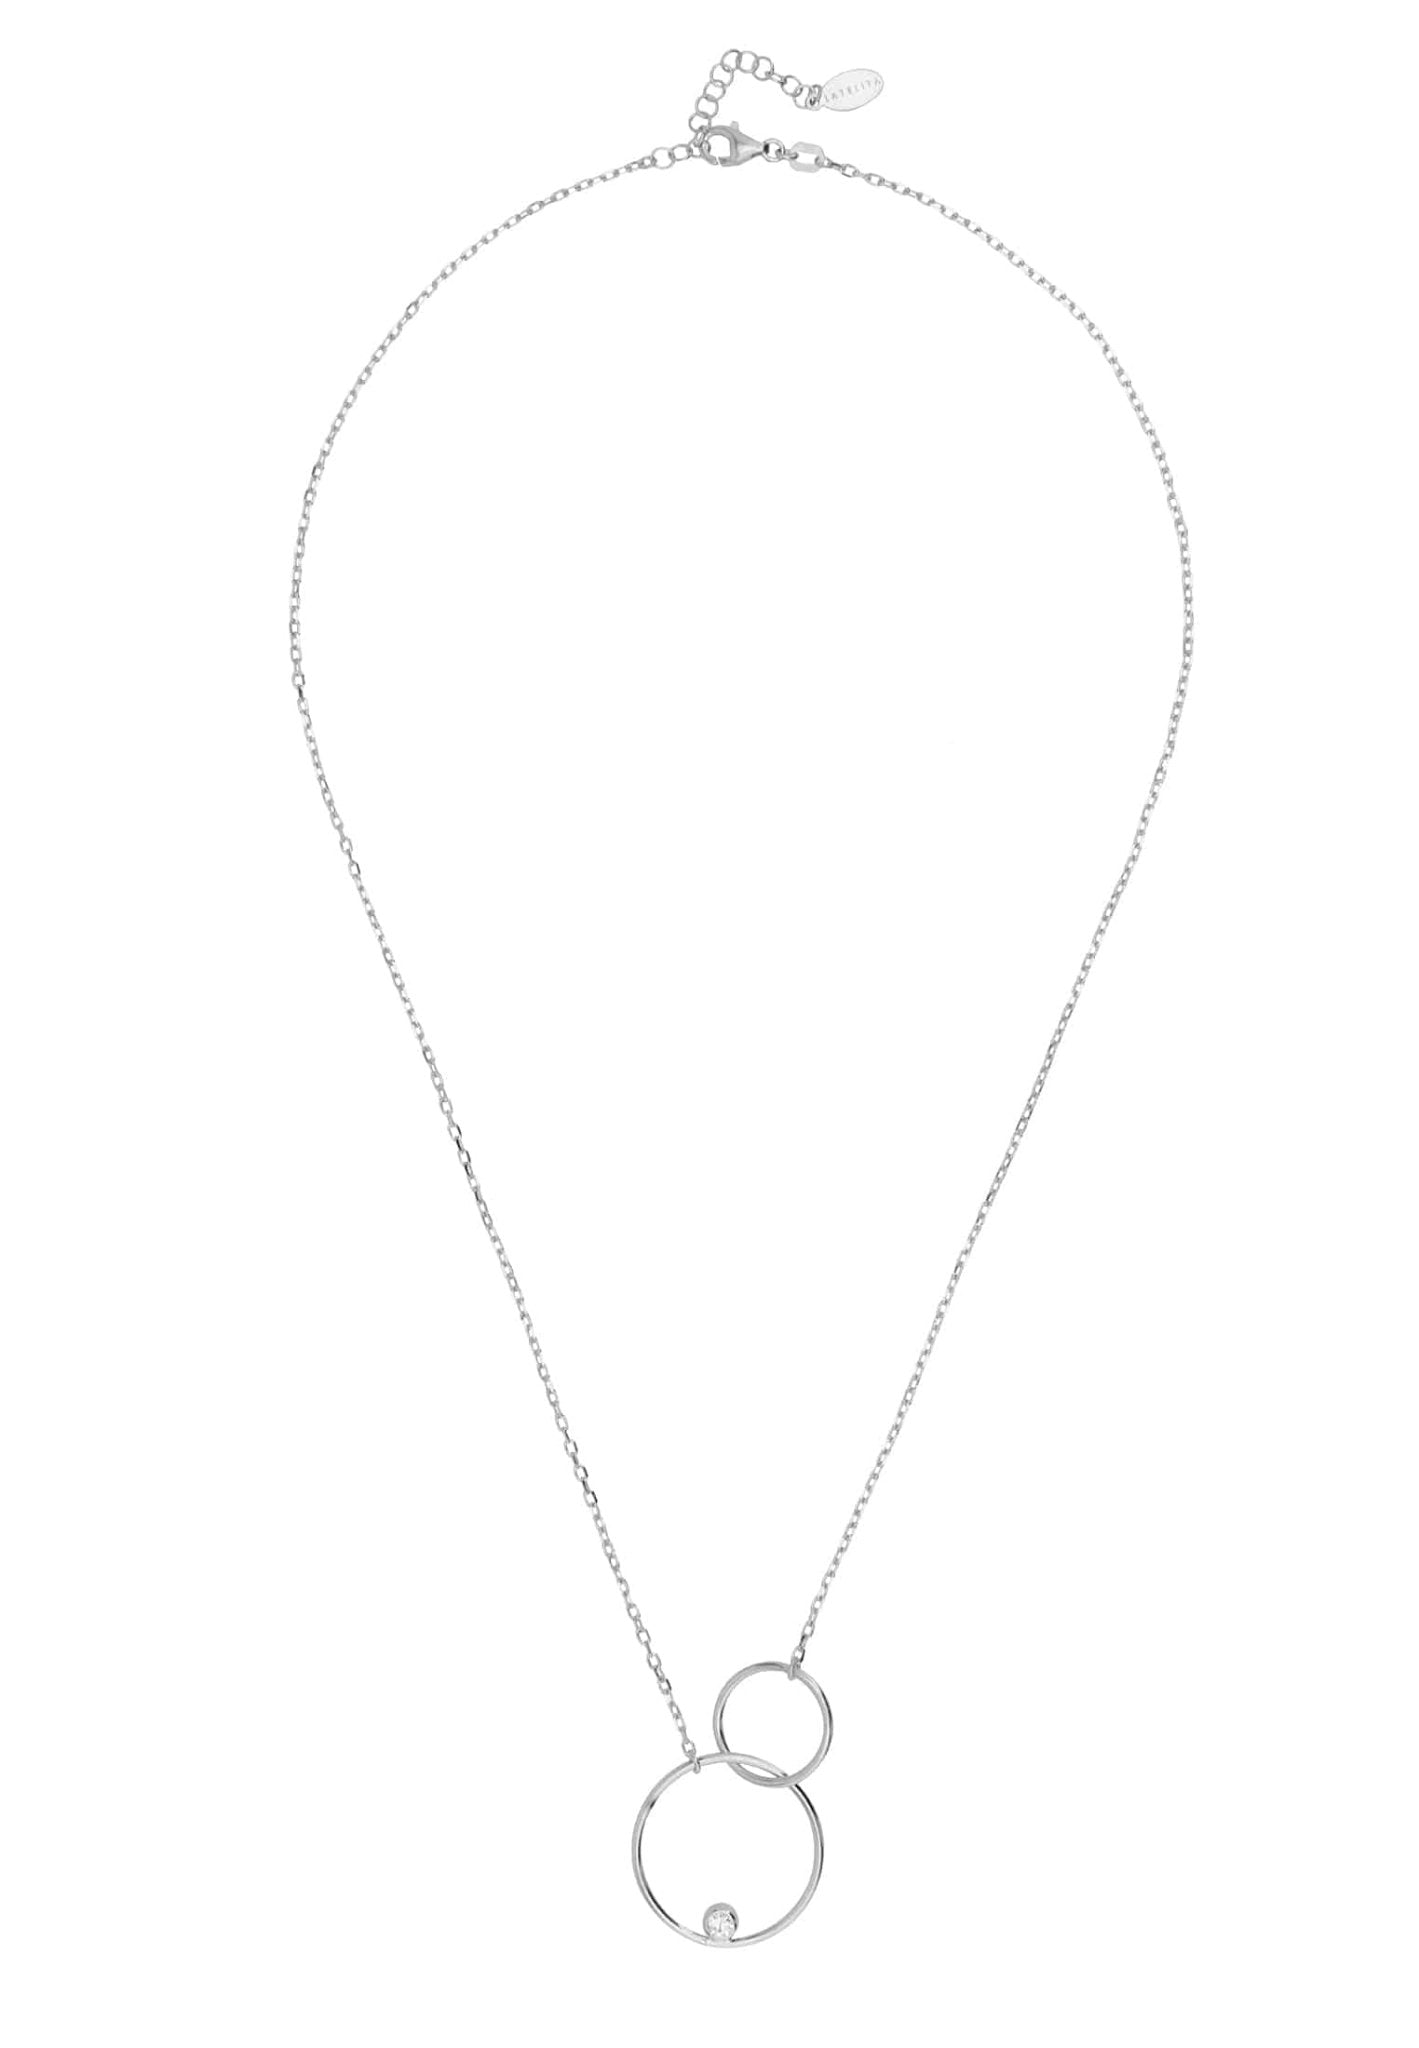 Linked Halo Circle Necklace Silver - LATELITA Necklaces